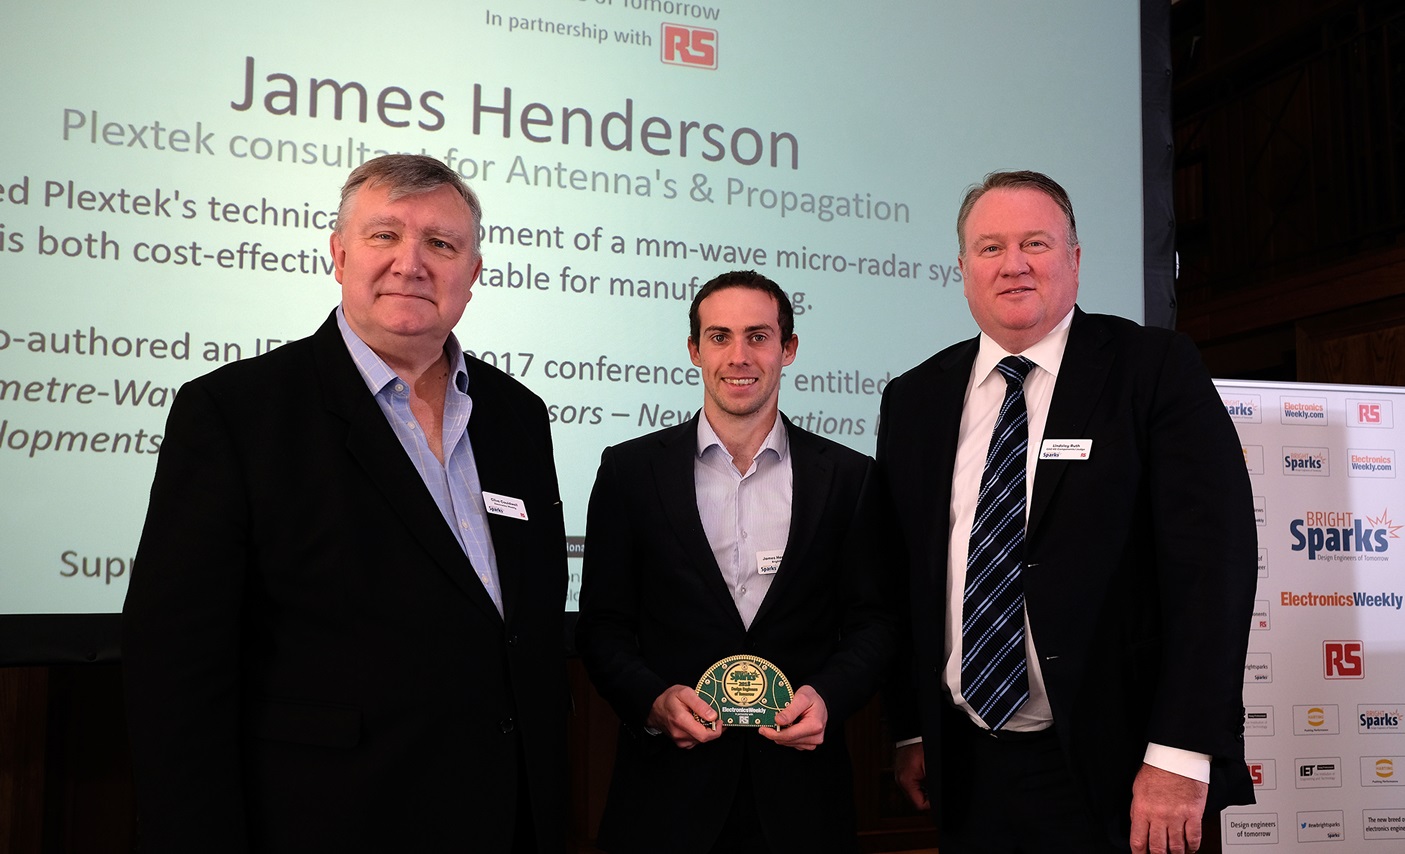 Plextek Consultant, James Henderson awarded “BrightSparks, Design Engineers of Tomorrow” by Electronics Weekly